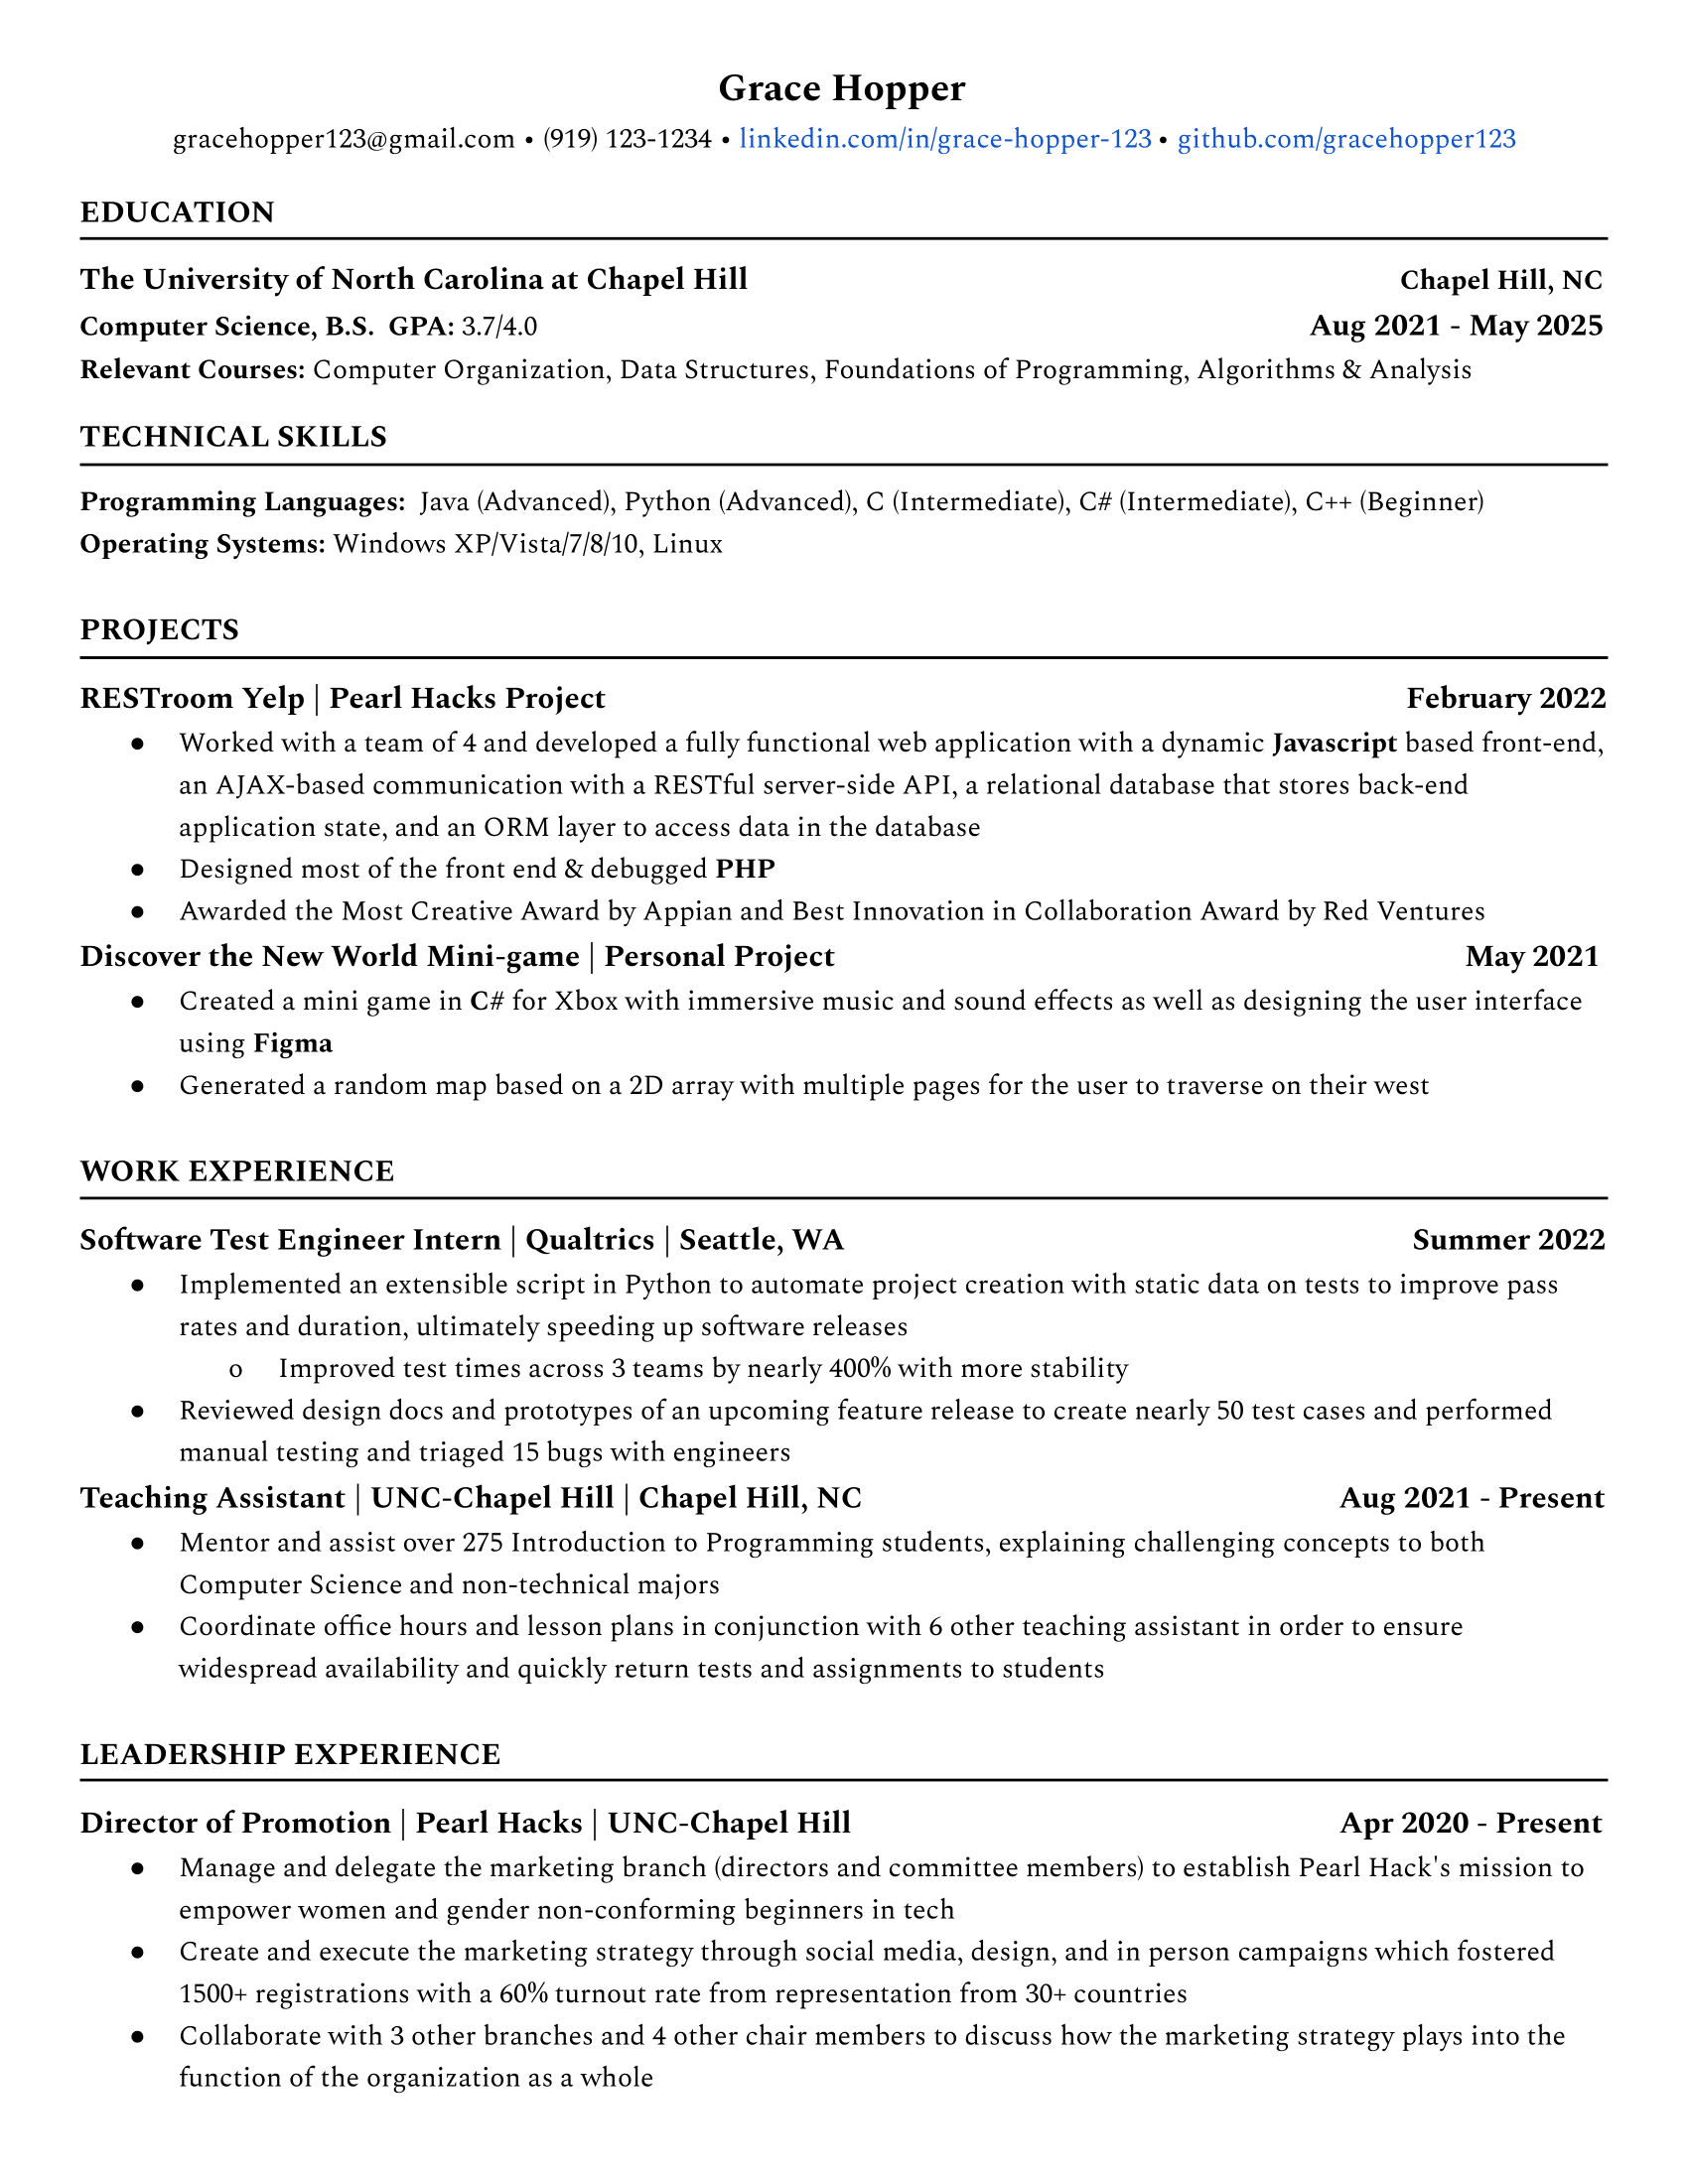 simple resume format for technical